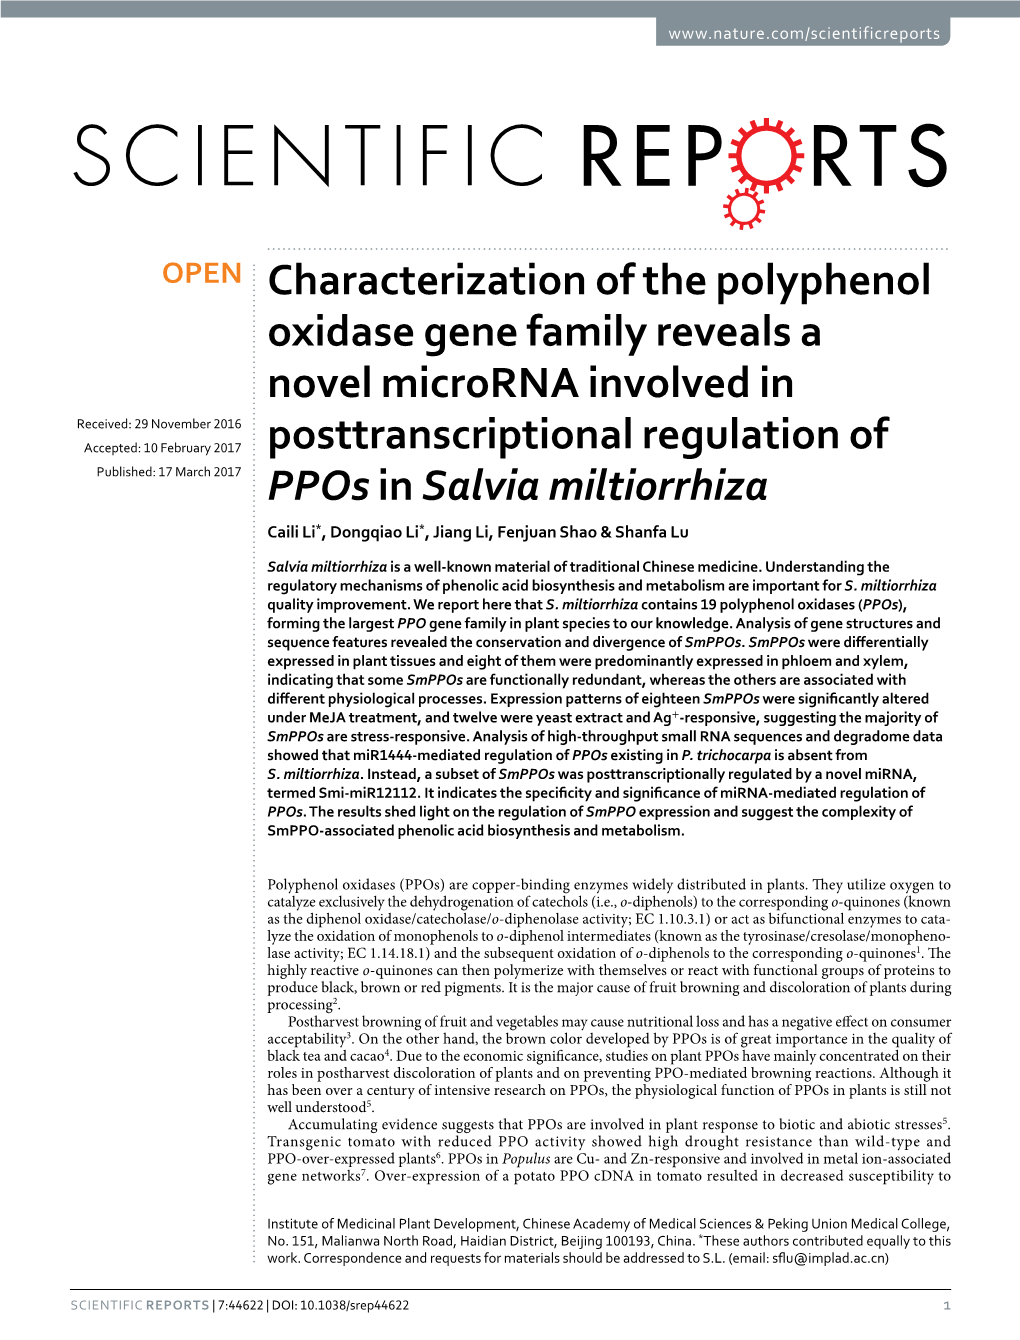 Characterization of the Polyphenol Oxidase Gene Family Reveals a Novel